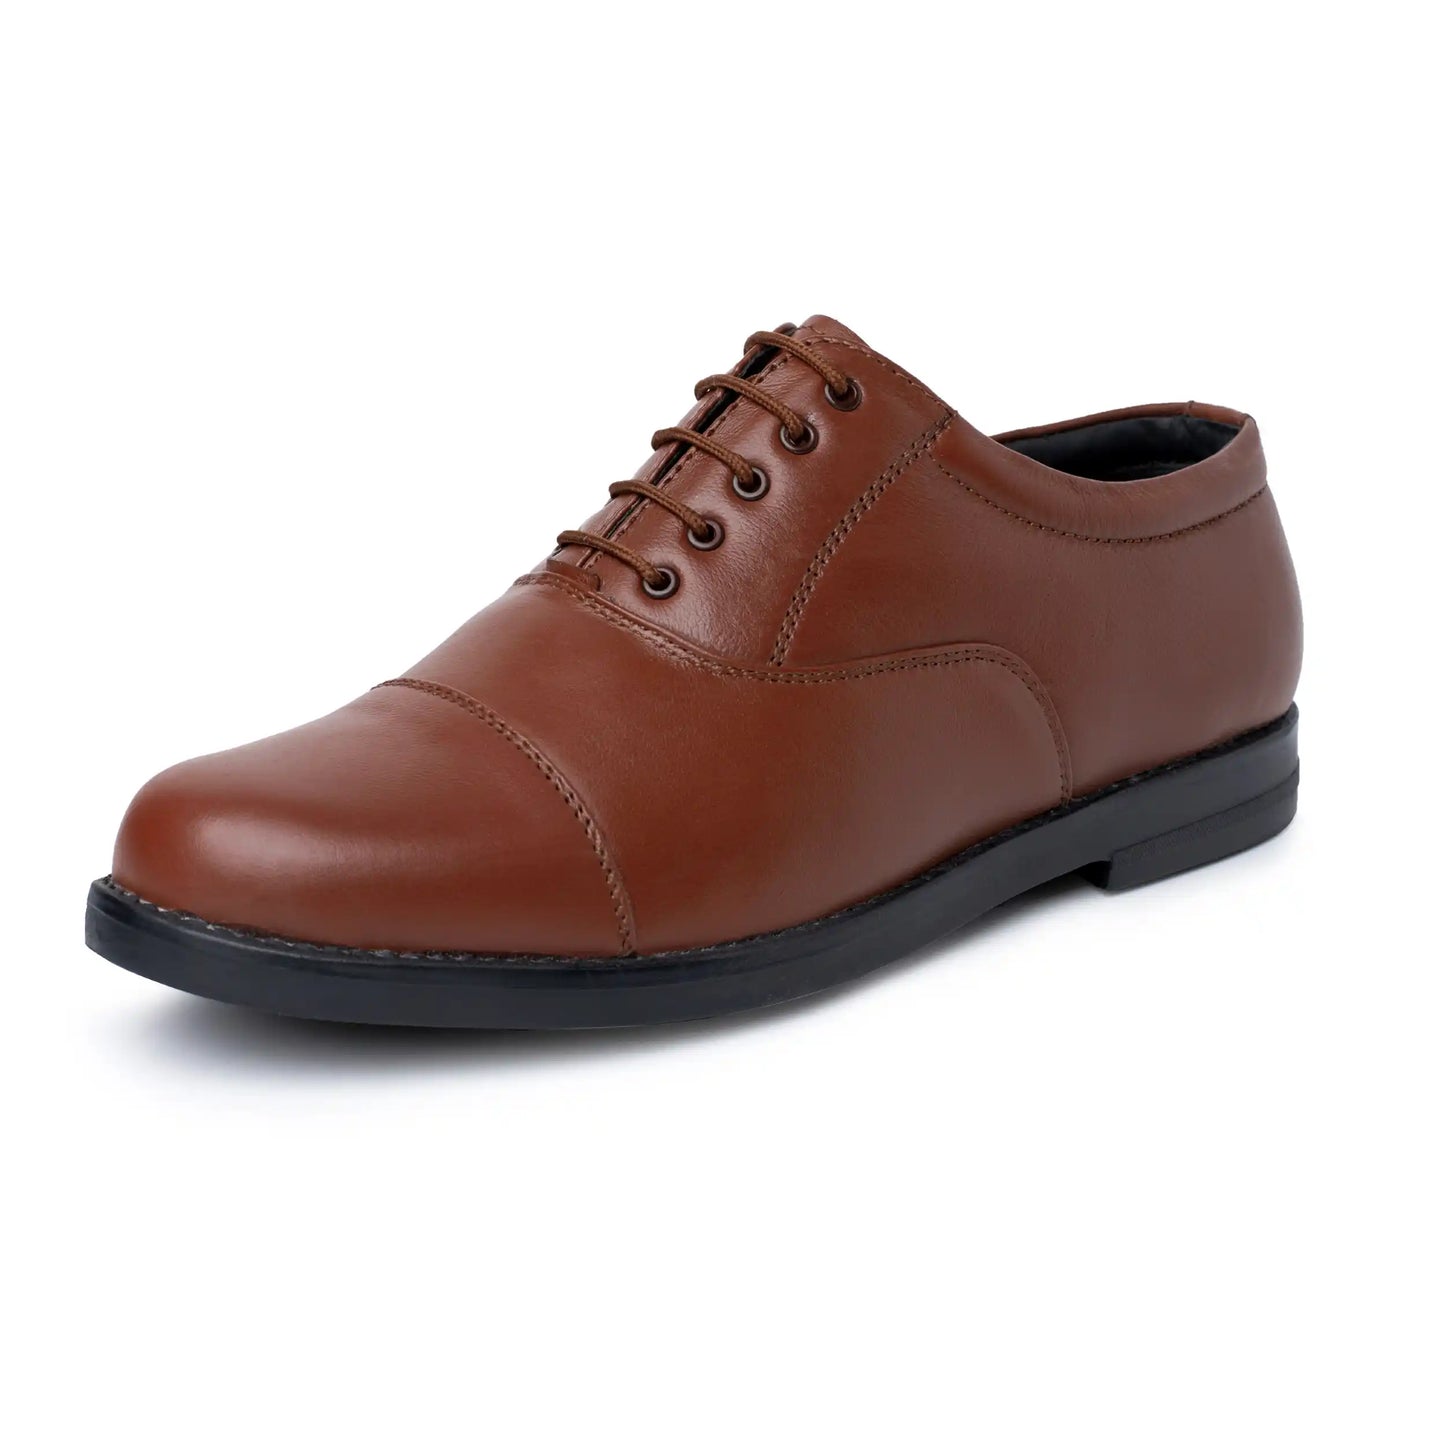 Genuine Leather Oxford Shoes Lace Up